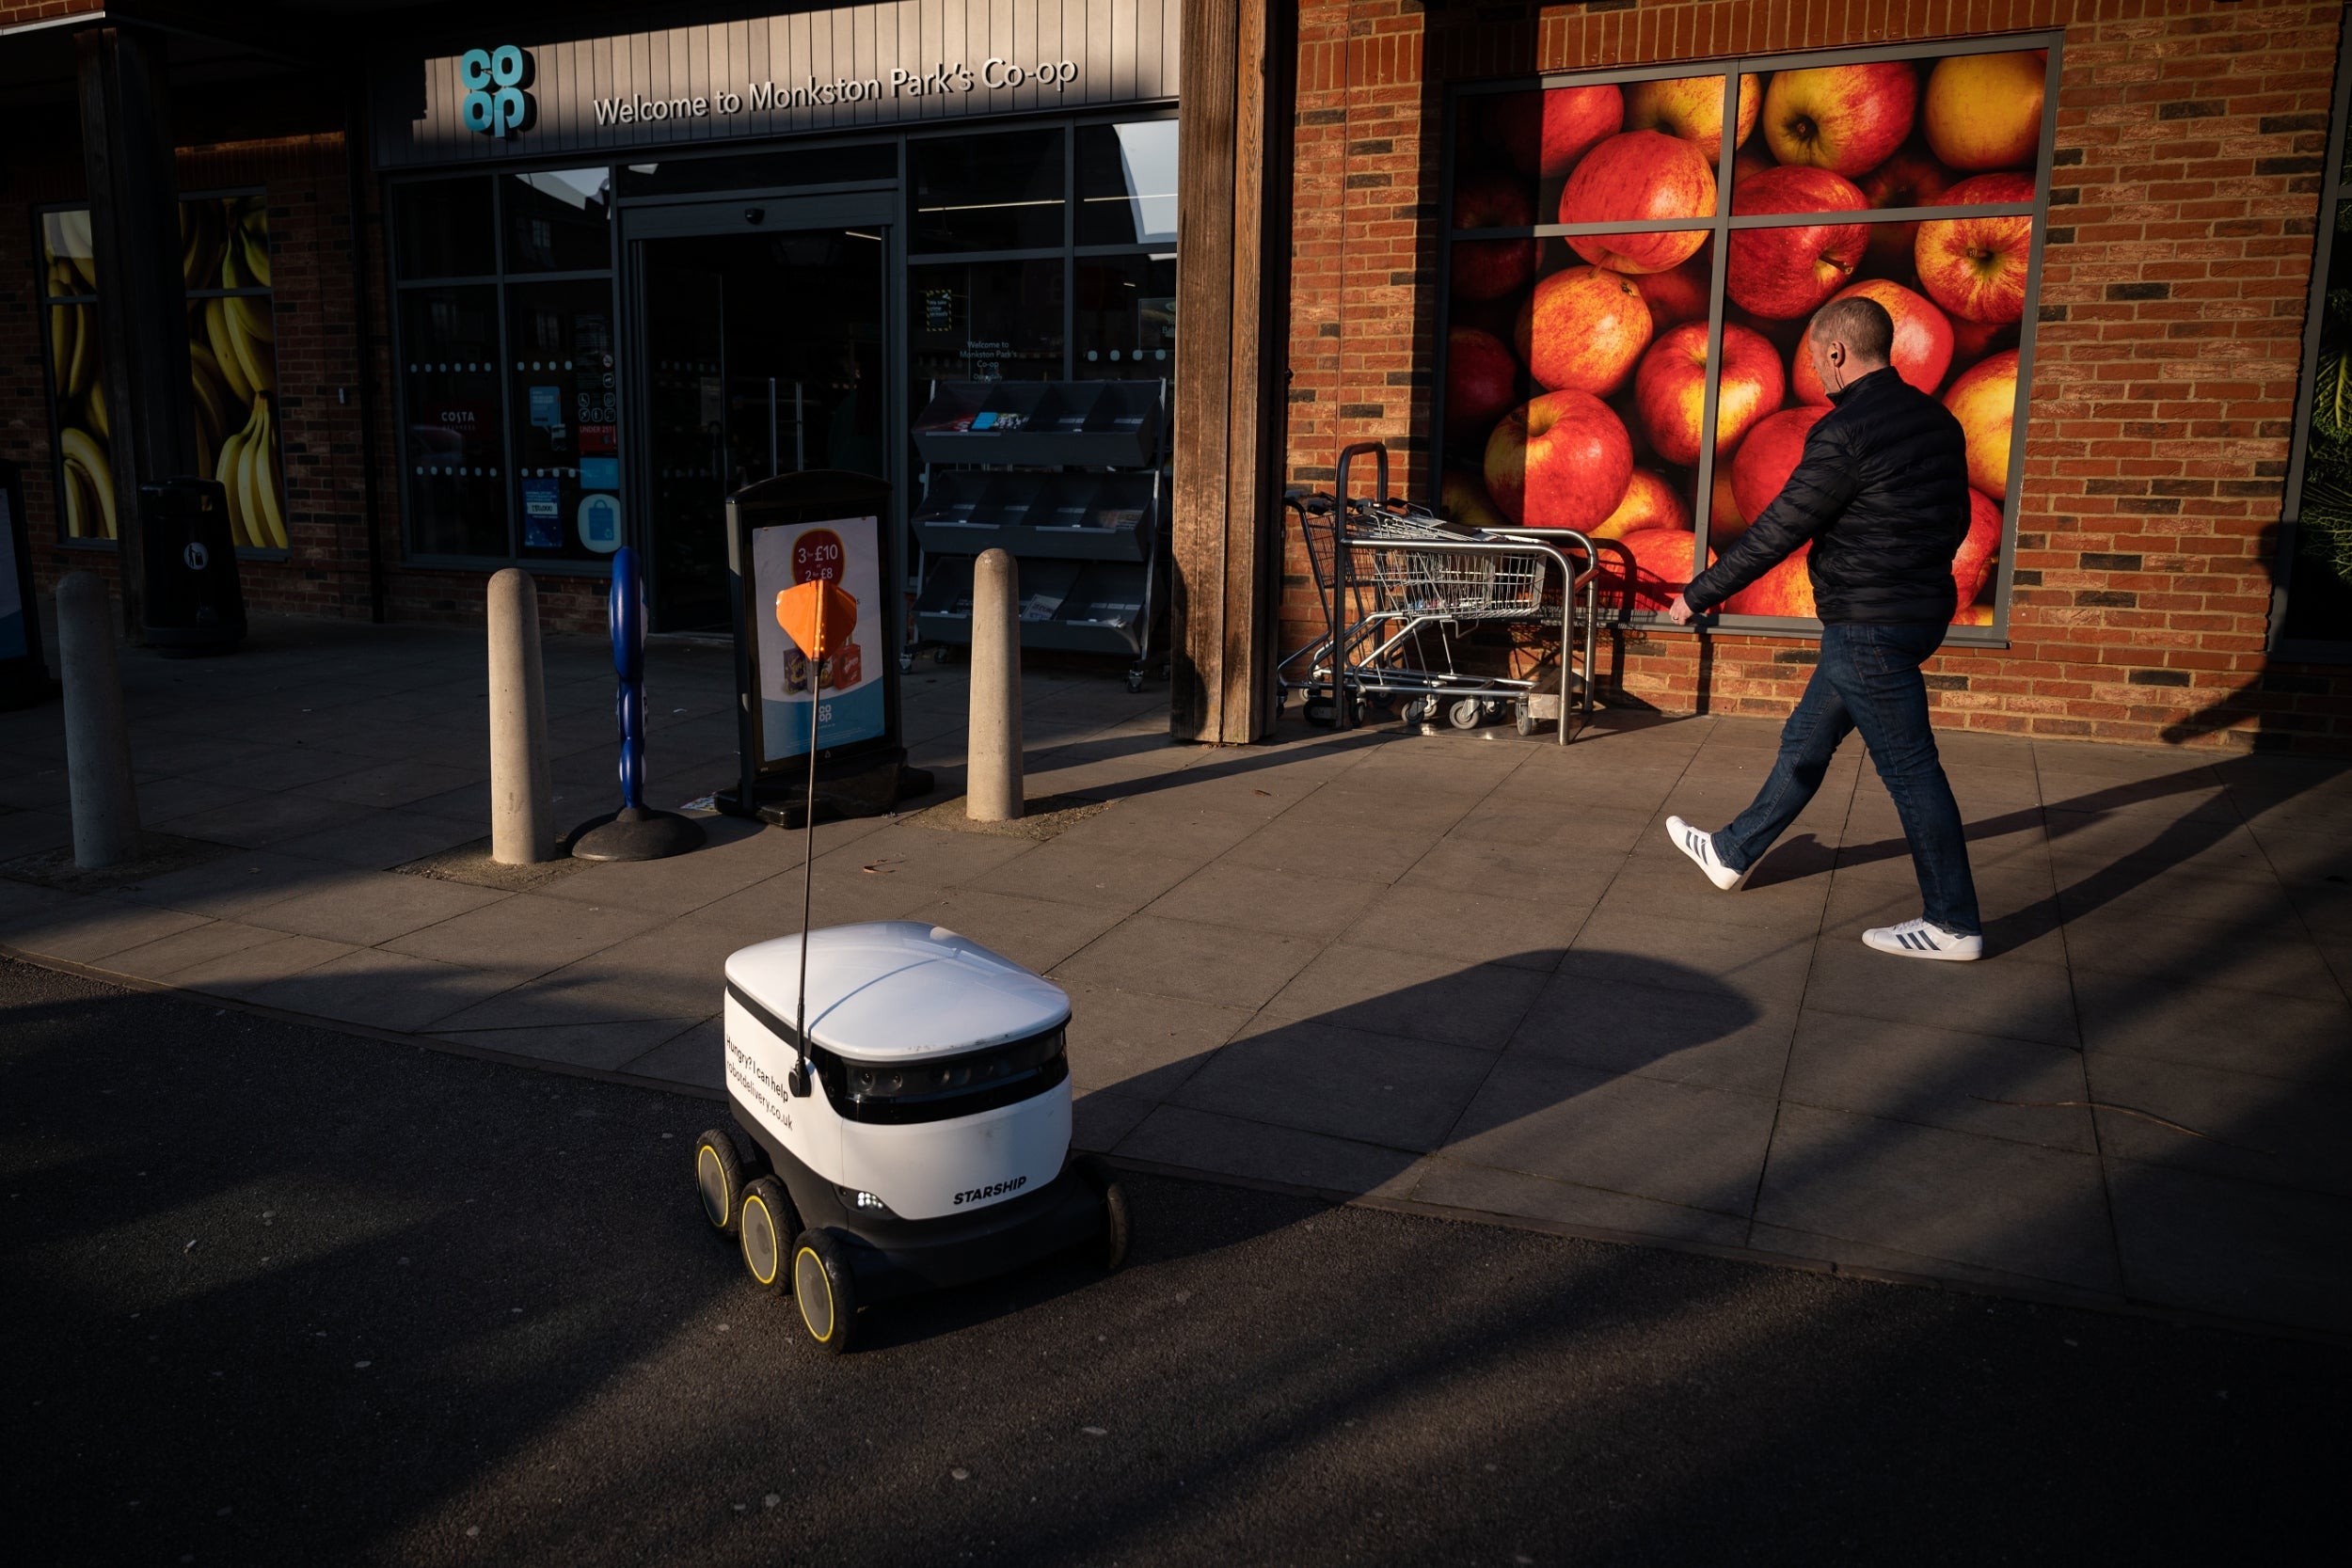 There is the potential for the robots to become a viable business